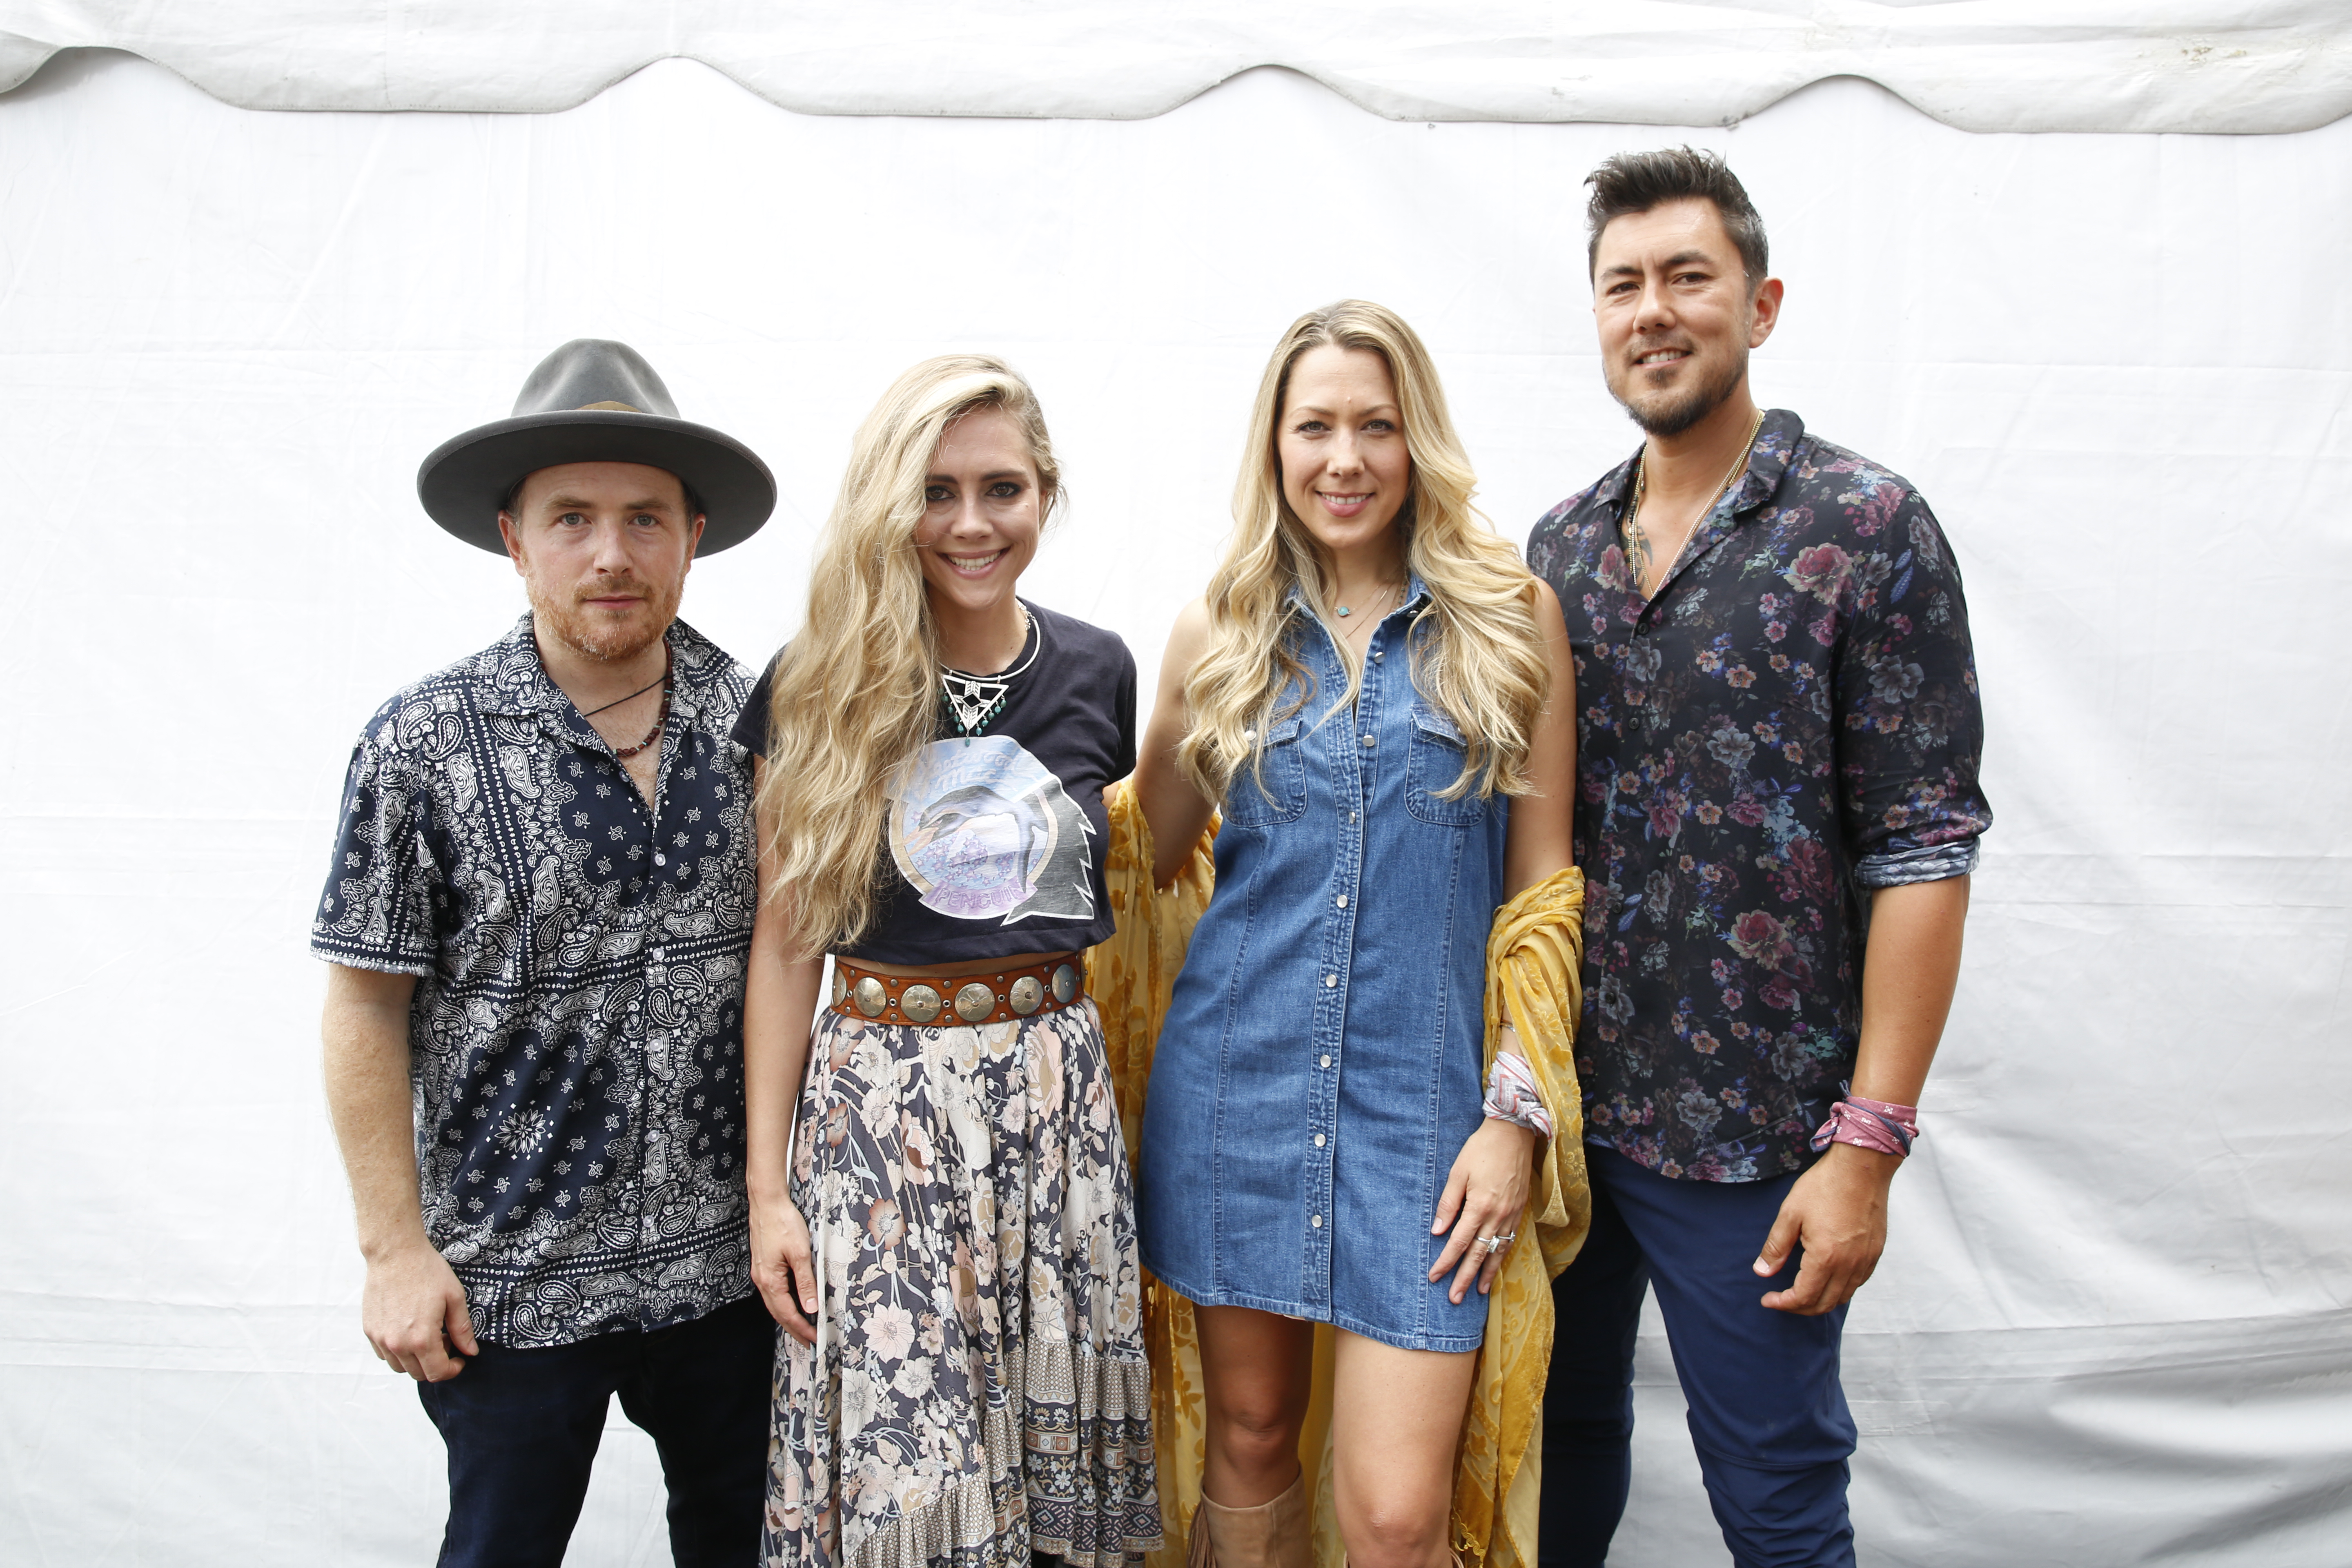 Everything You Need to Know About Colbie Caillat’s Cali Country Group Gone West